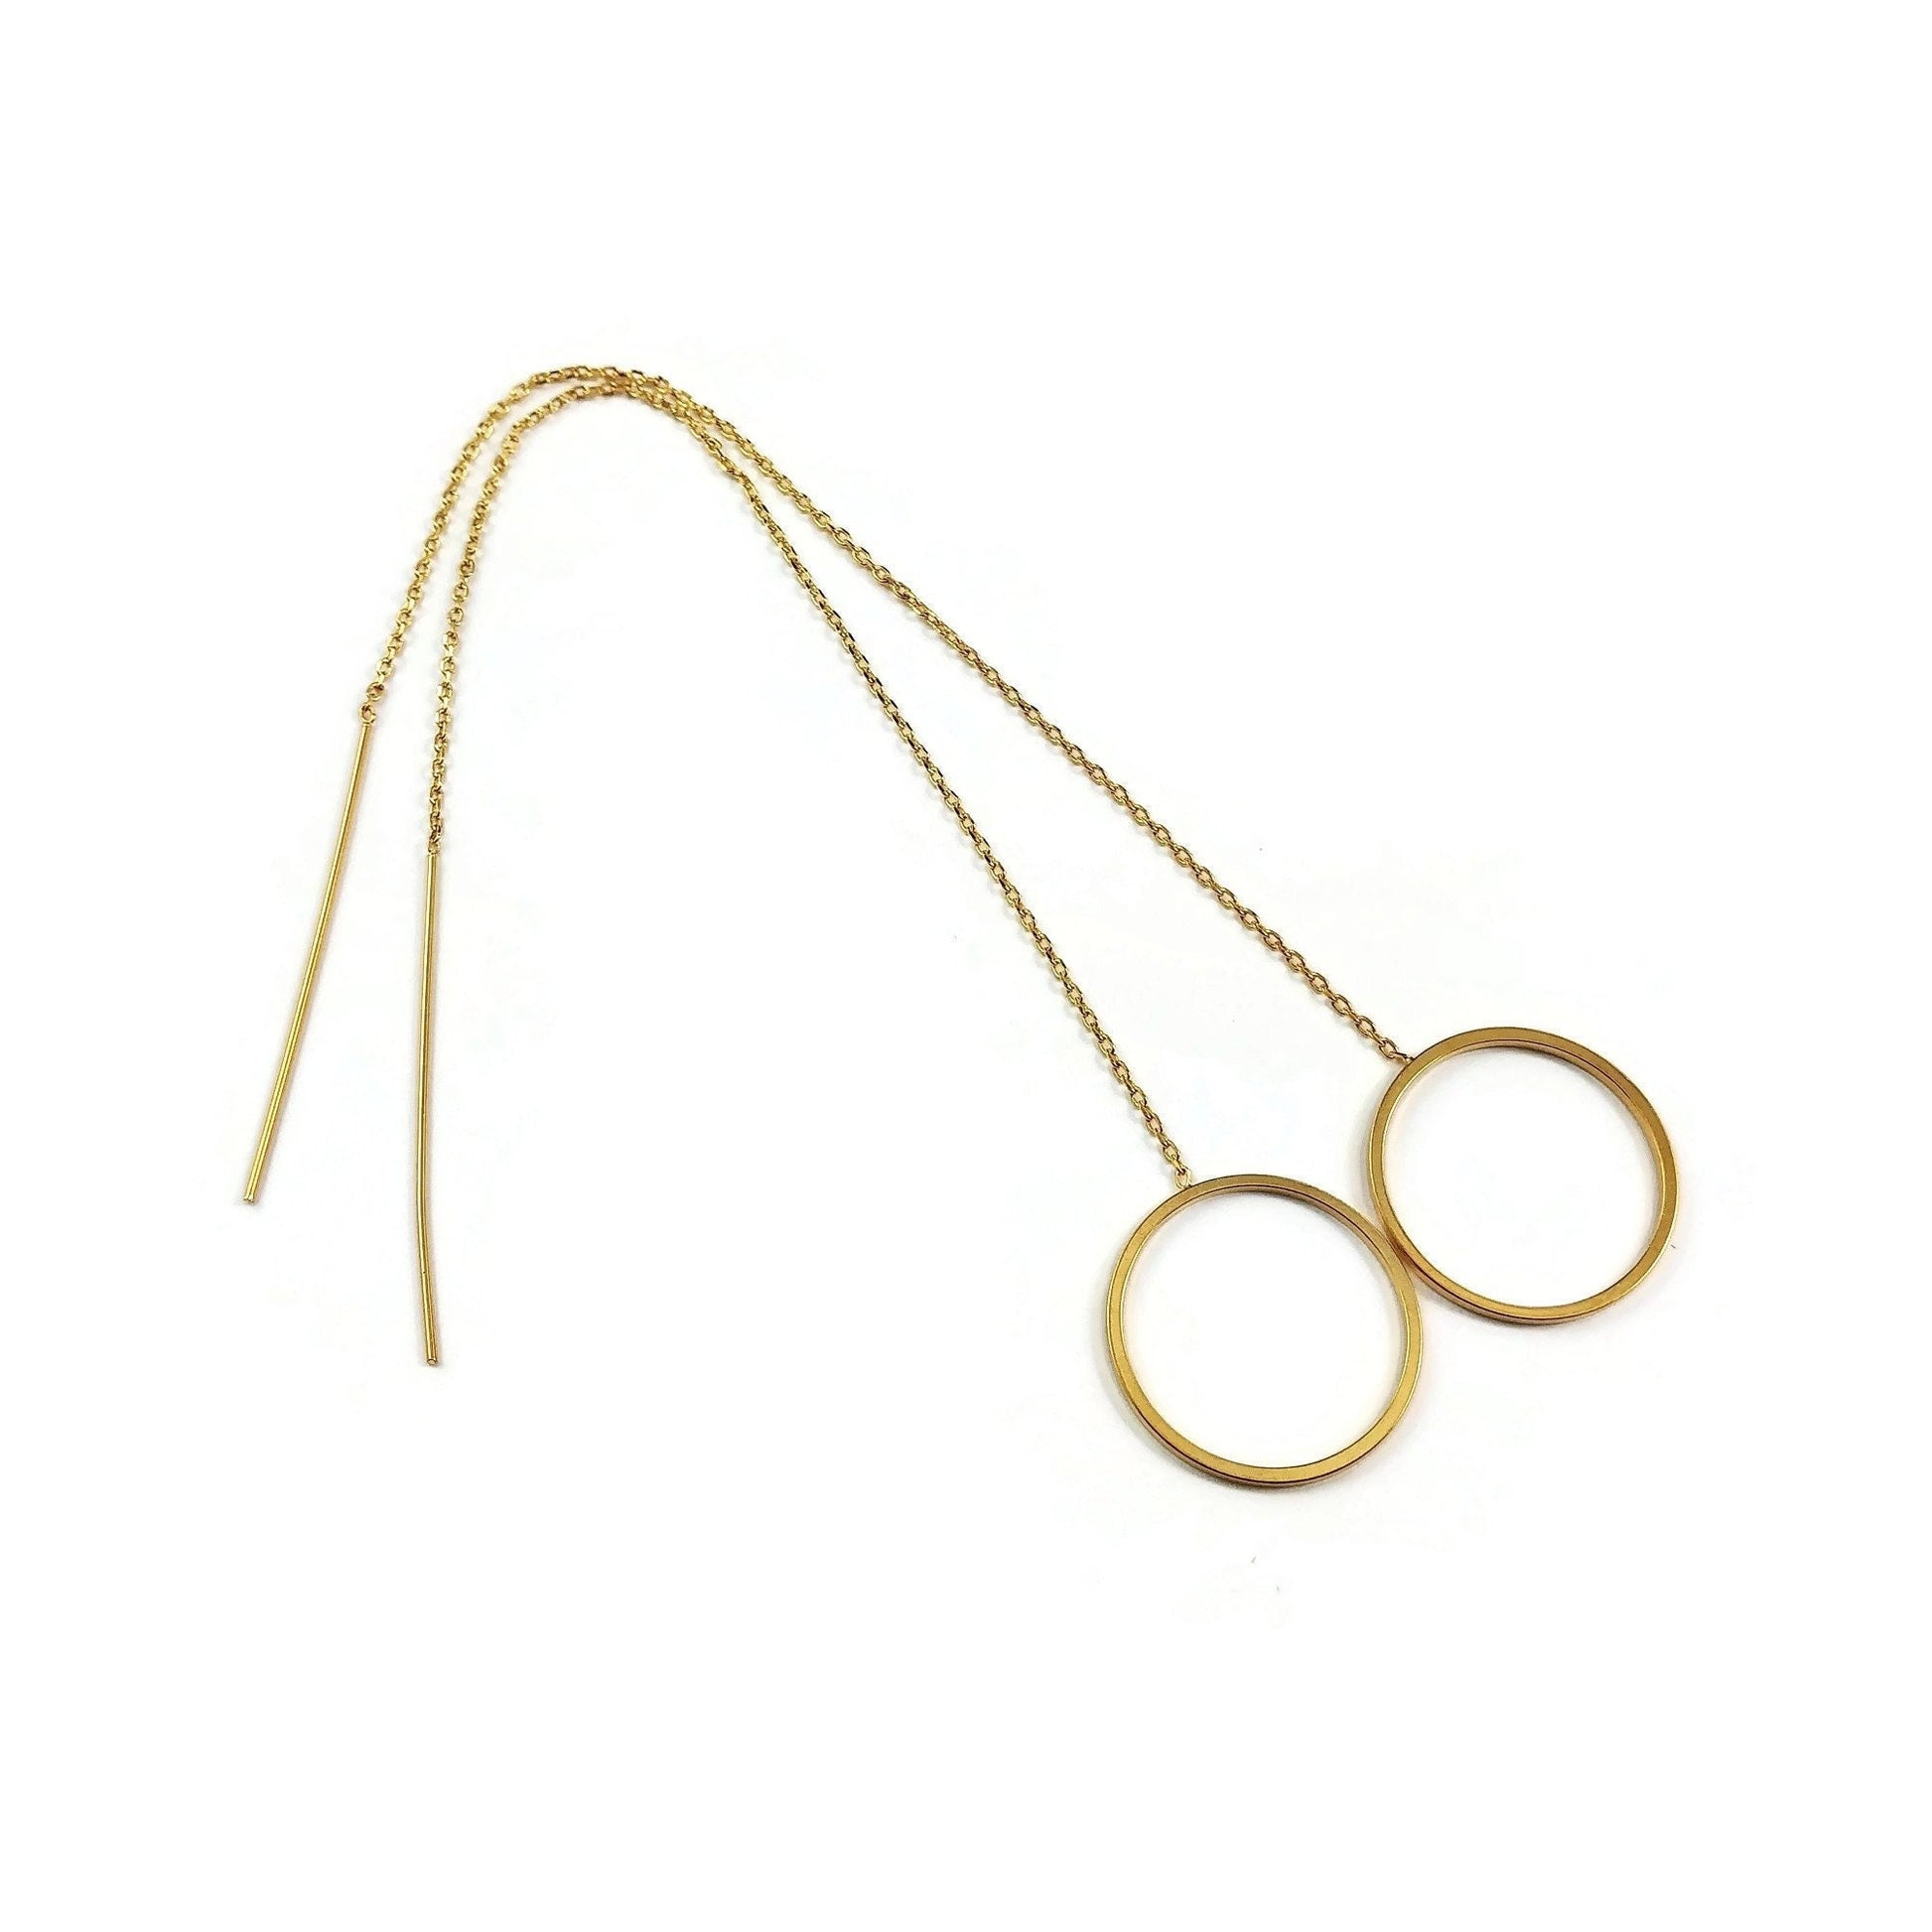 18K gold plated chain earwire, Hypoallergenic nickel free ear thread, Circle, heart or drop connector 